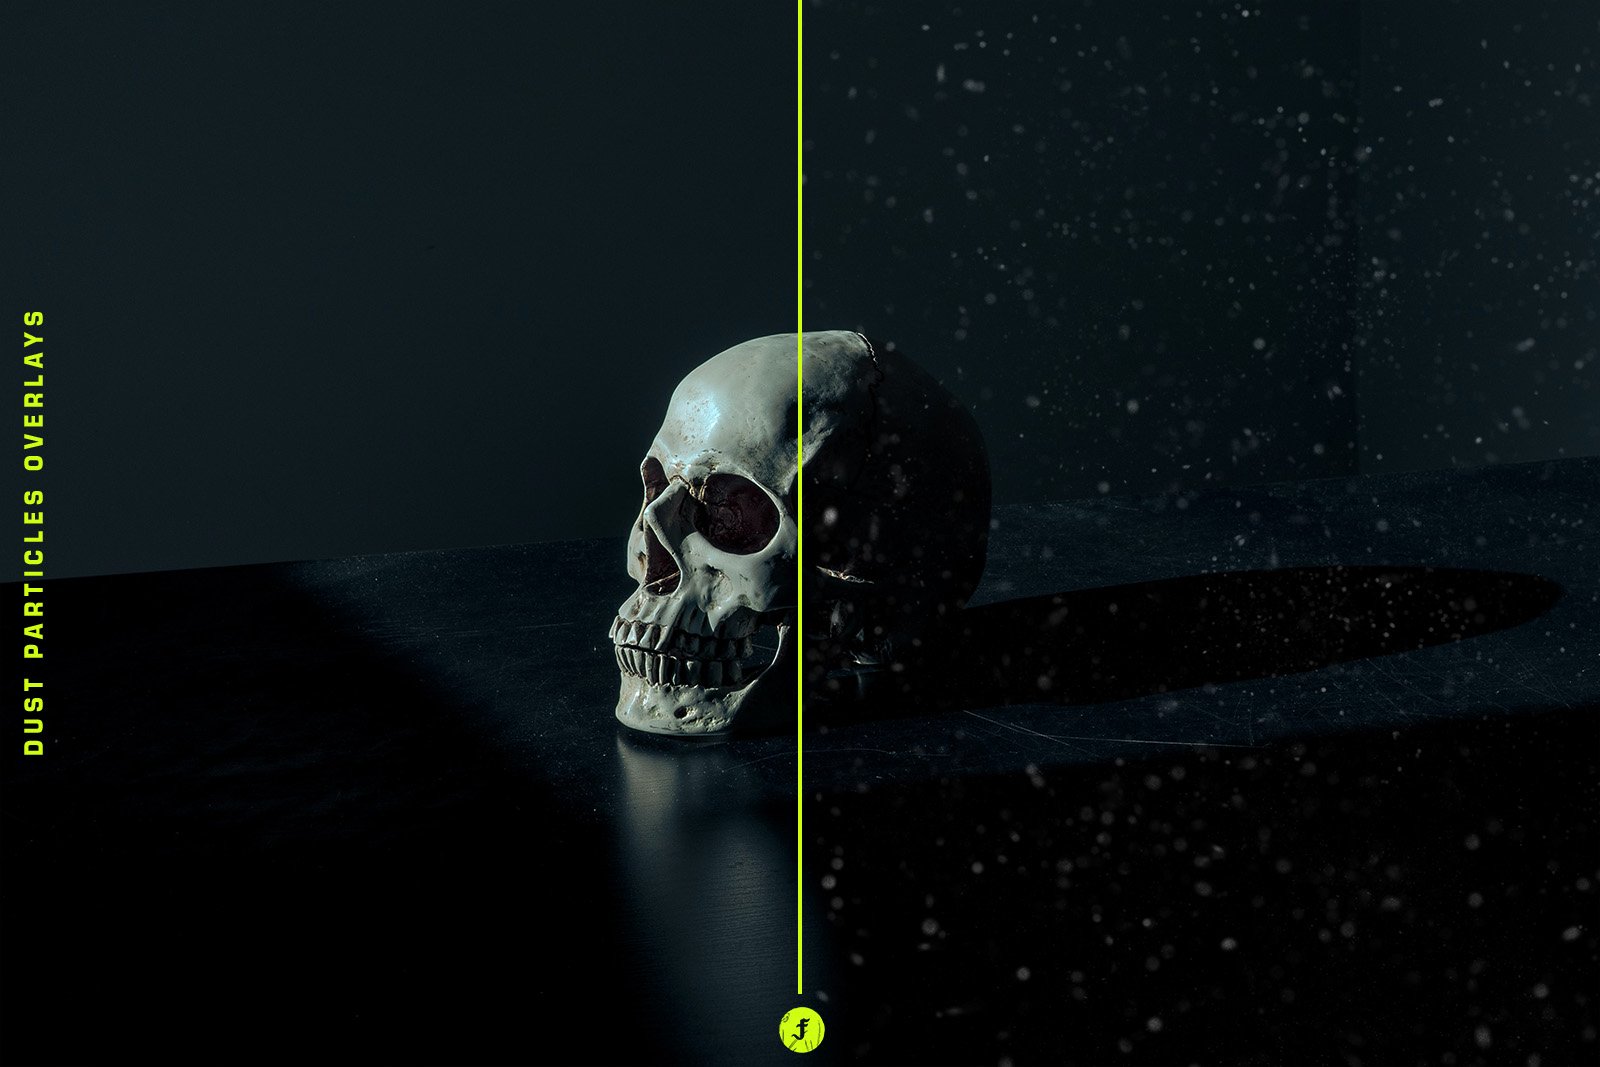 Black background and grey scull - creative idea for interesting project .